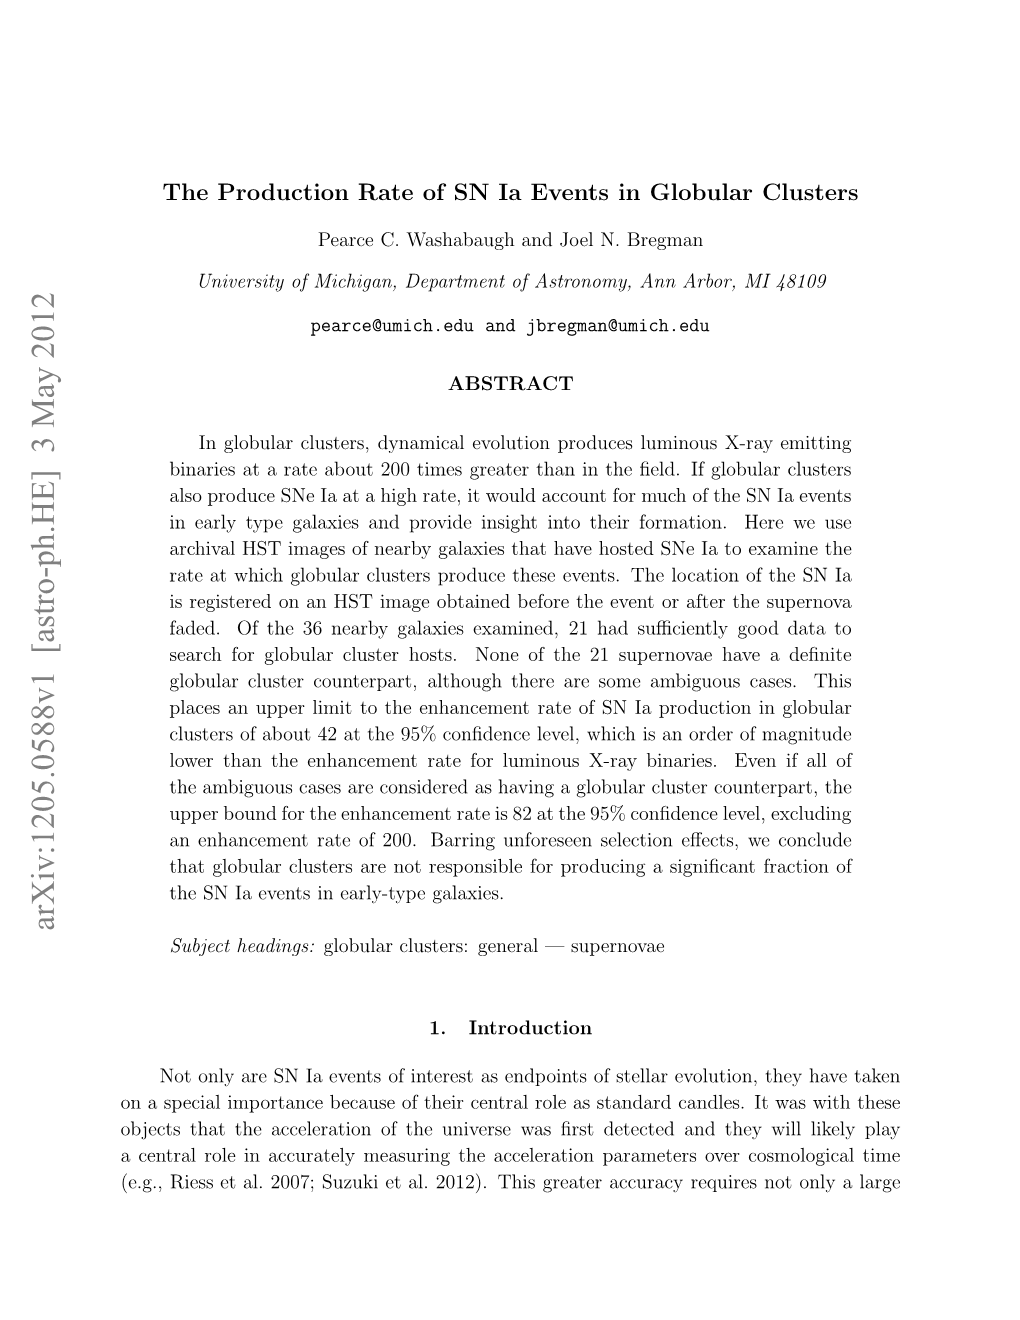 The Production Rate of SN Ia Events in Globular Clusters